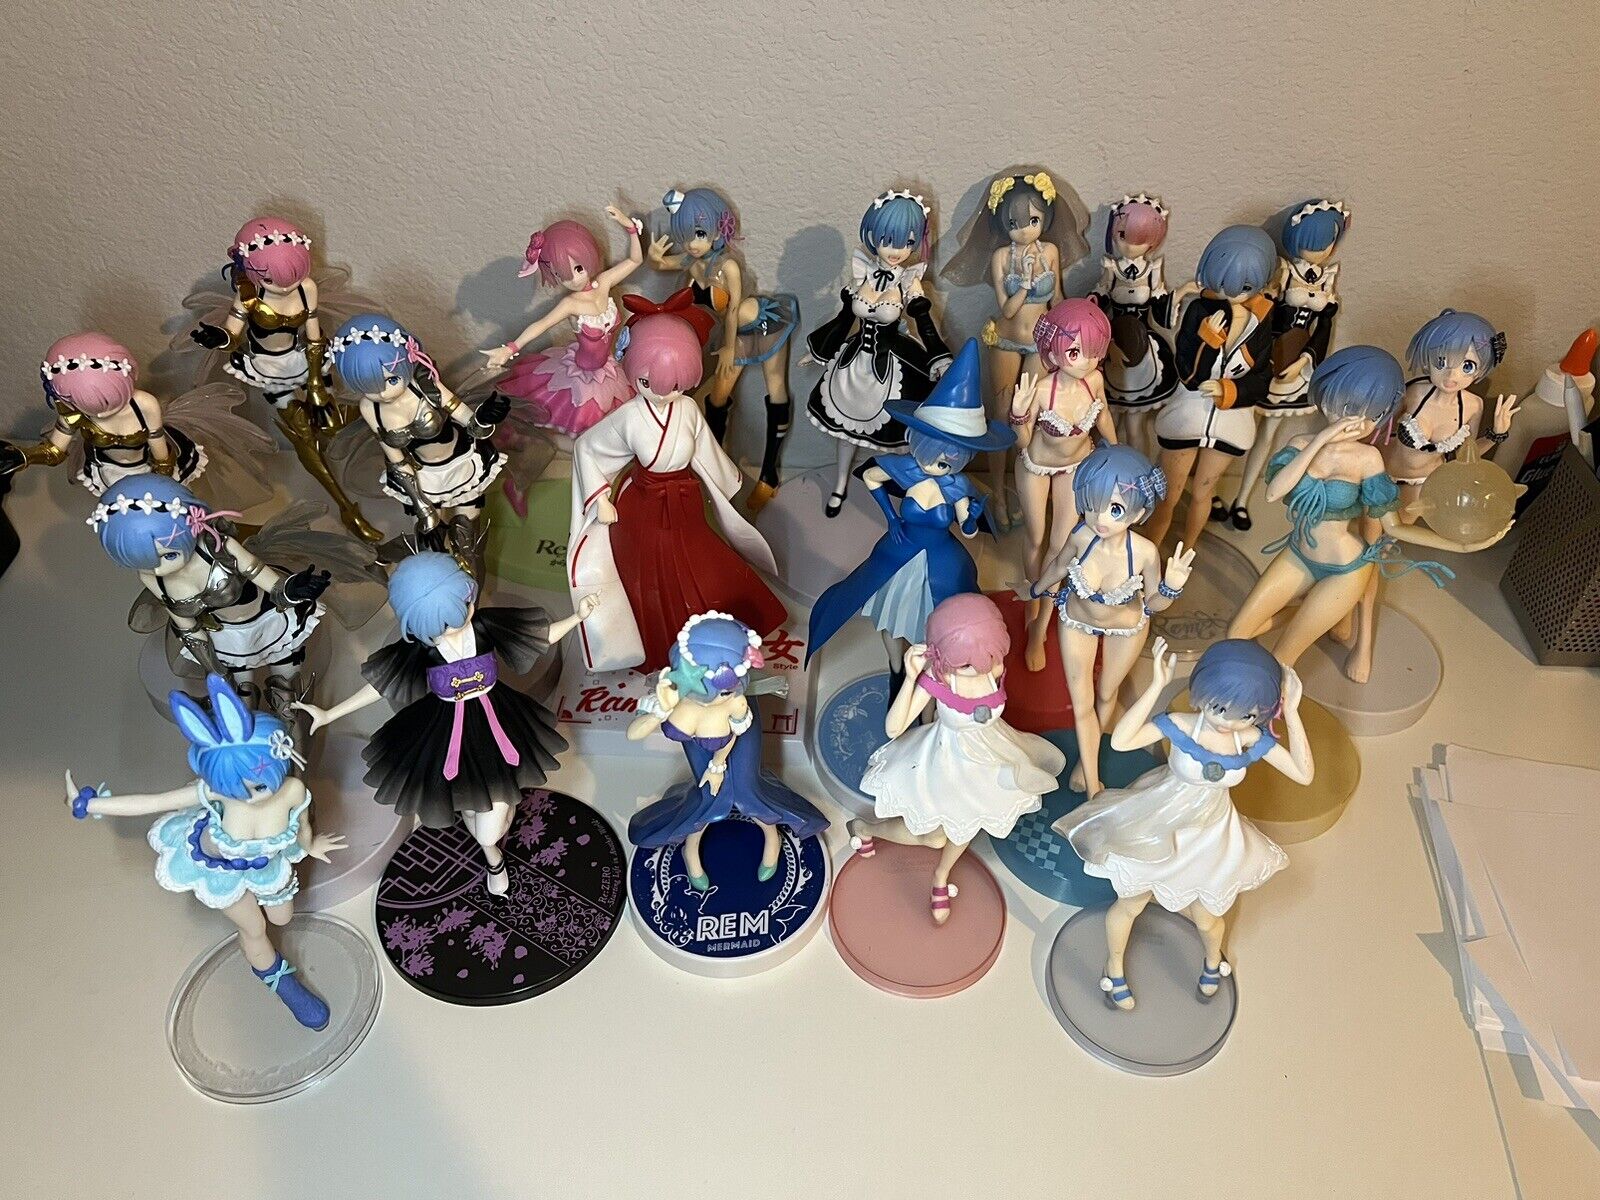 Re:zero REM And Ram Anime Figures Lot Of 22